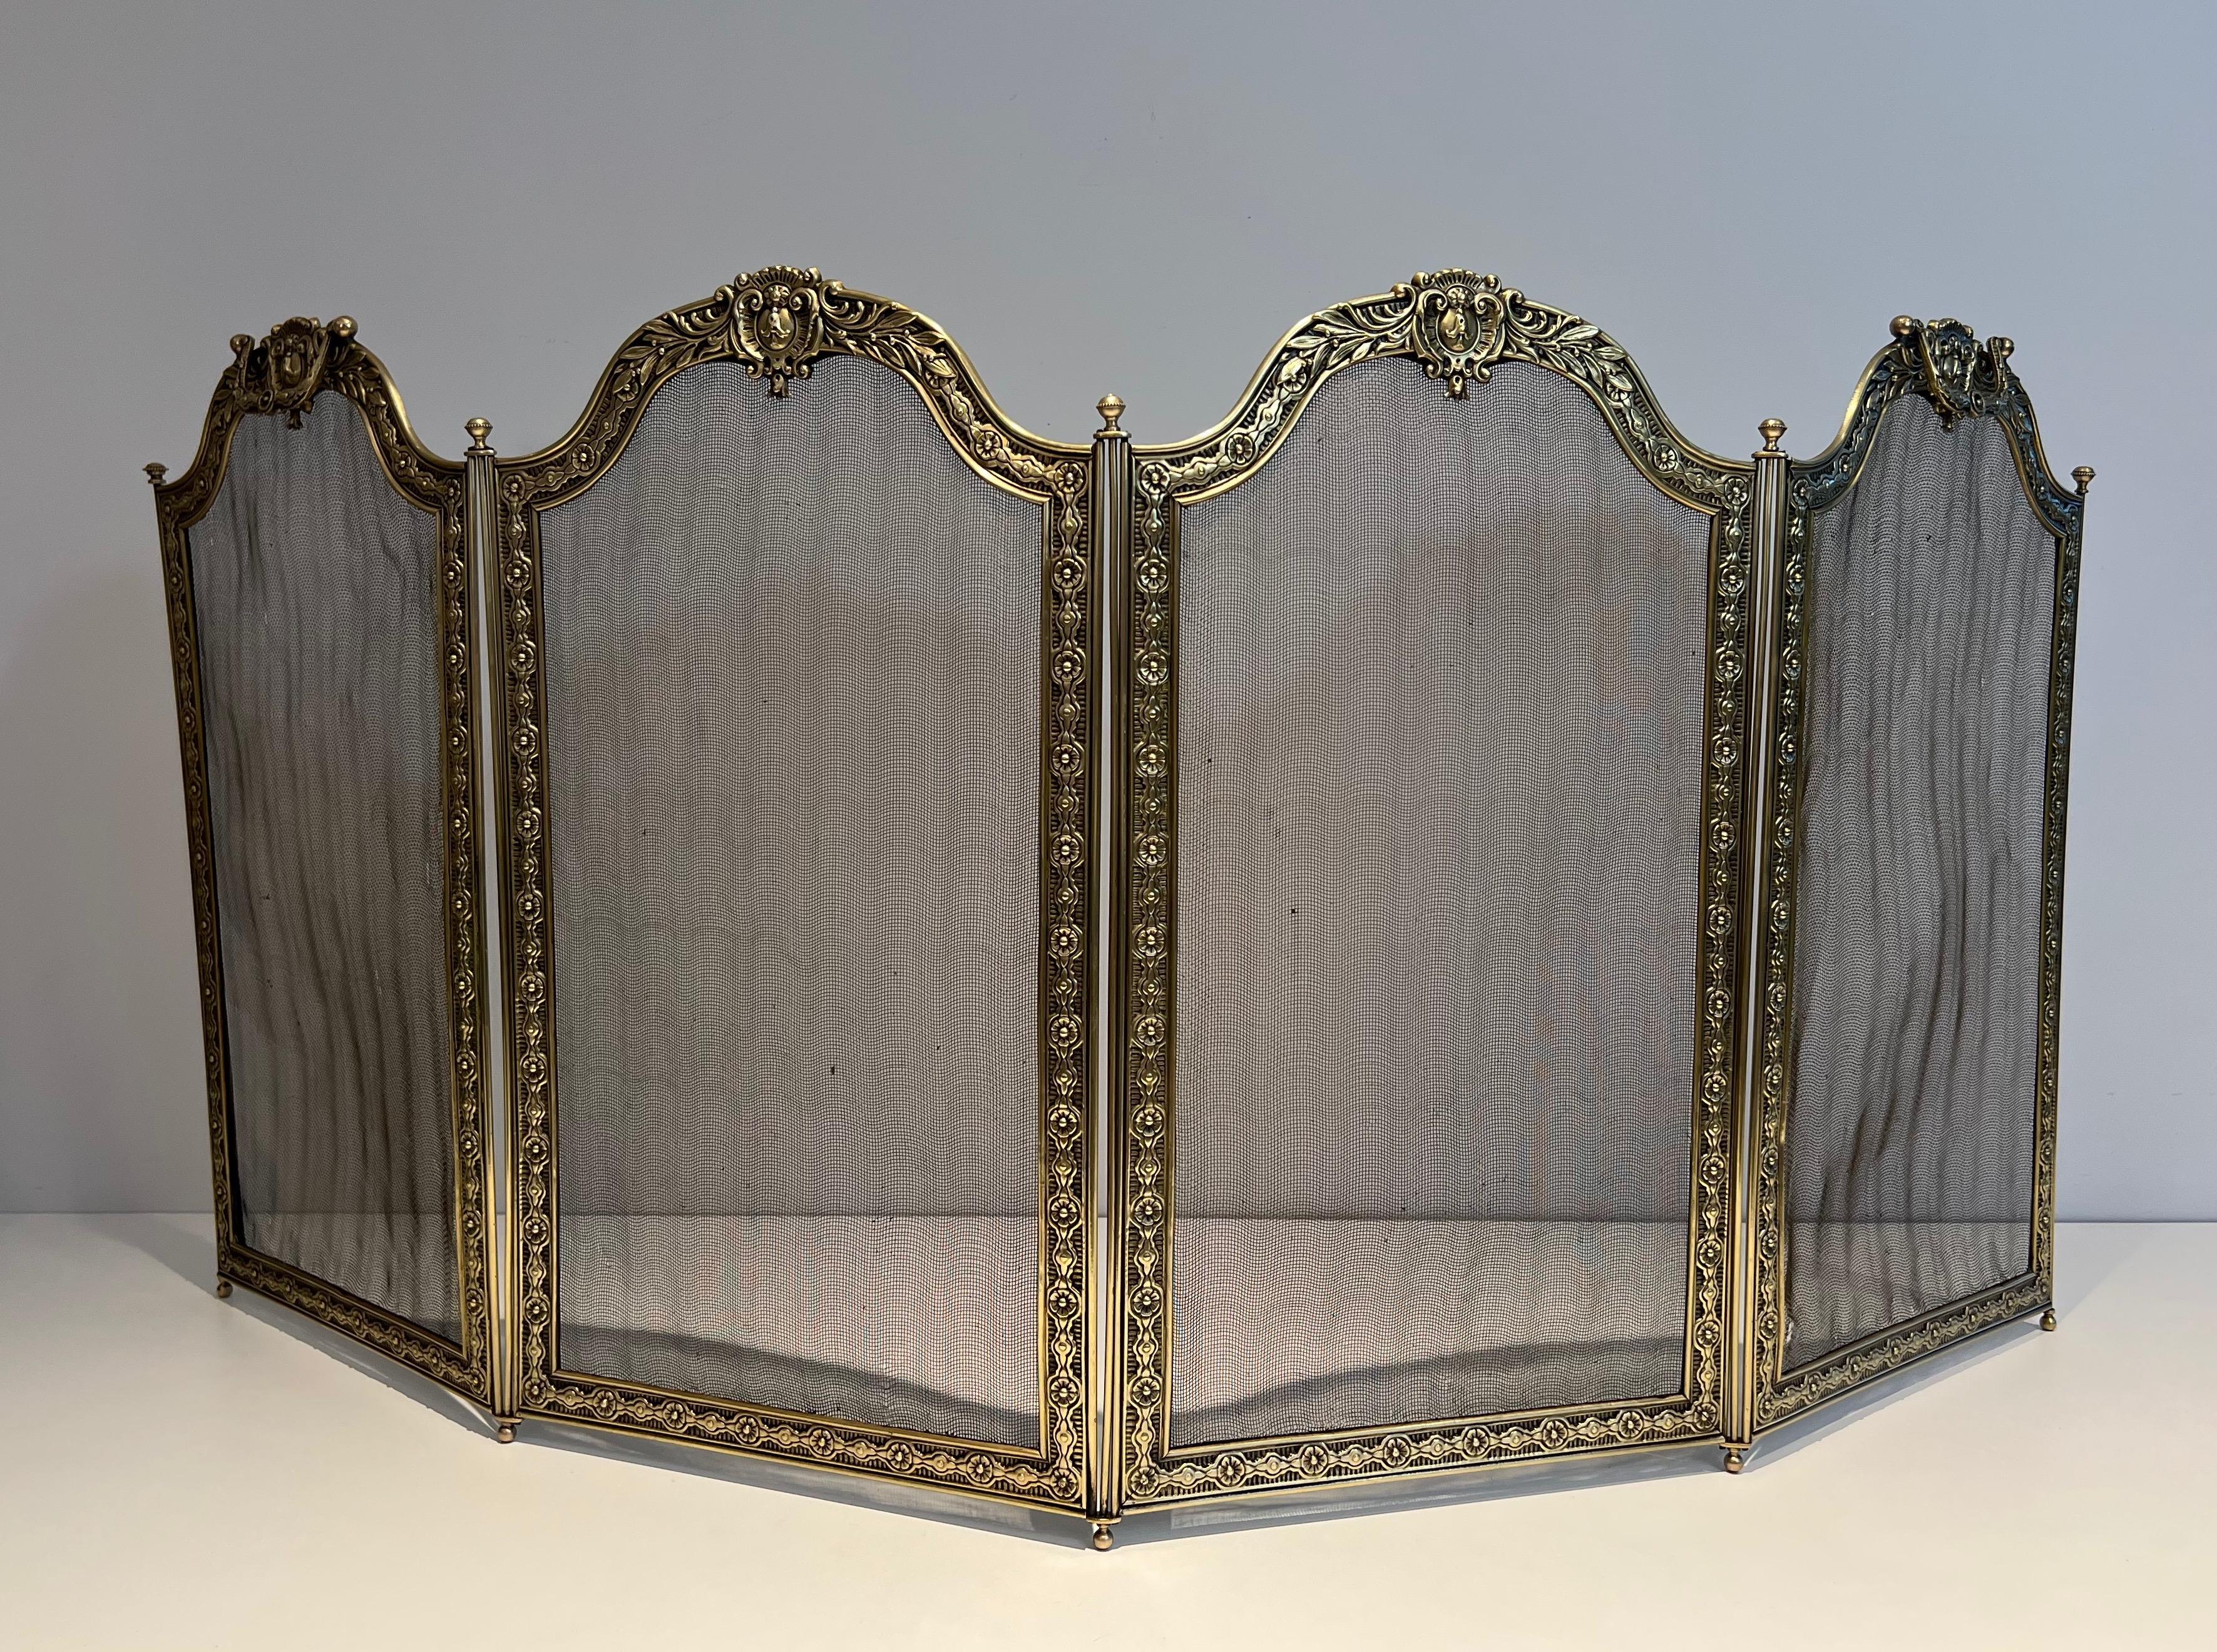 This large folding fireplace screen with 4 grilling panels and framed by an embossed brass and bronze frieze is decorated with macaroons and garlands decorated with rosettes. It has 2 removable handles. This is a French work in the Louis XVI Style.